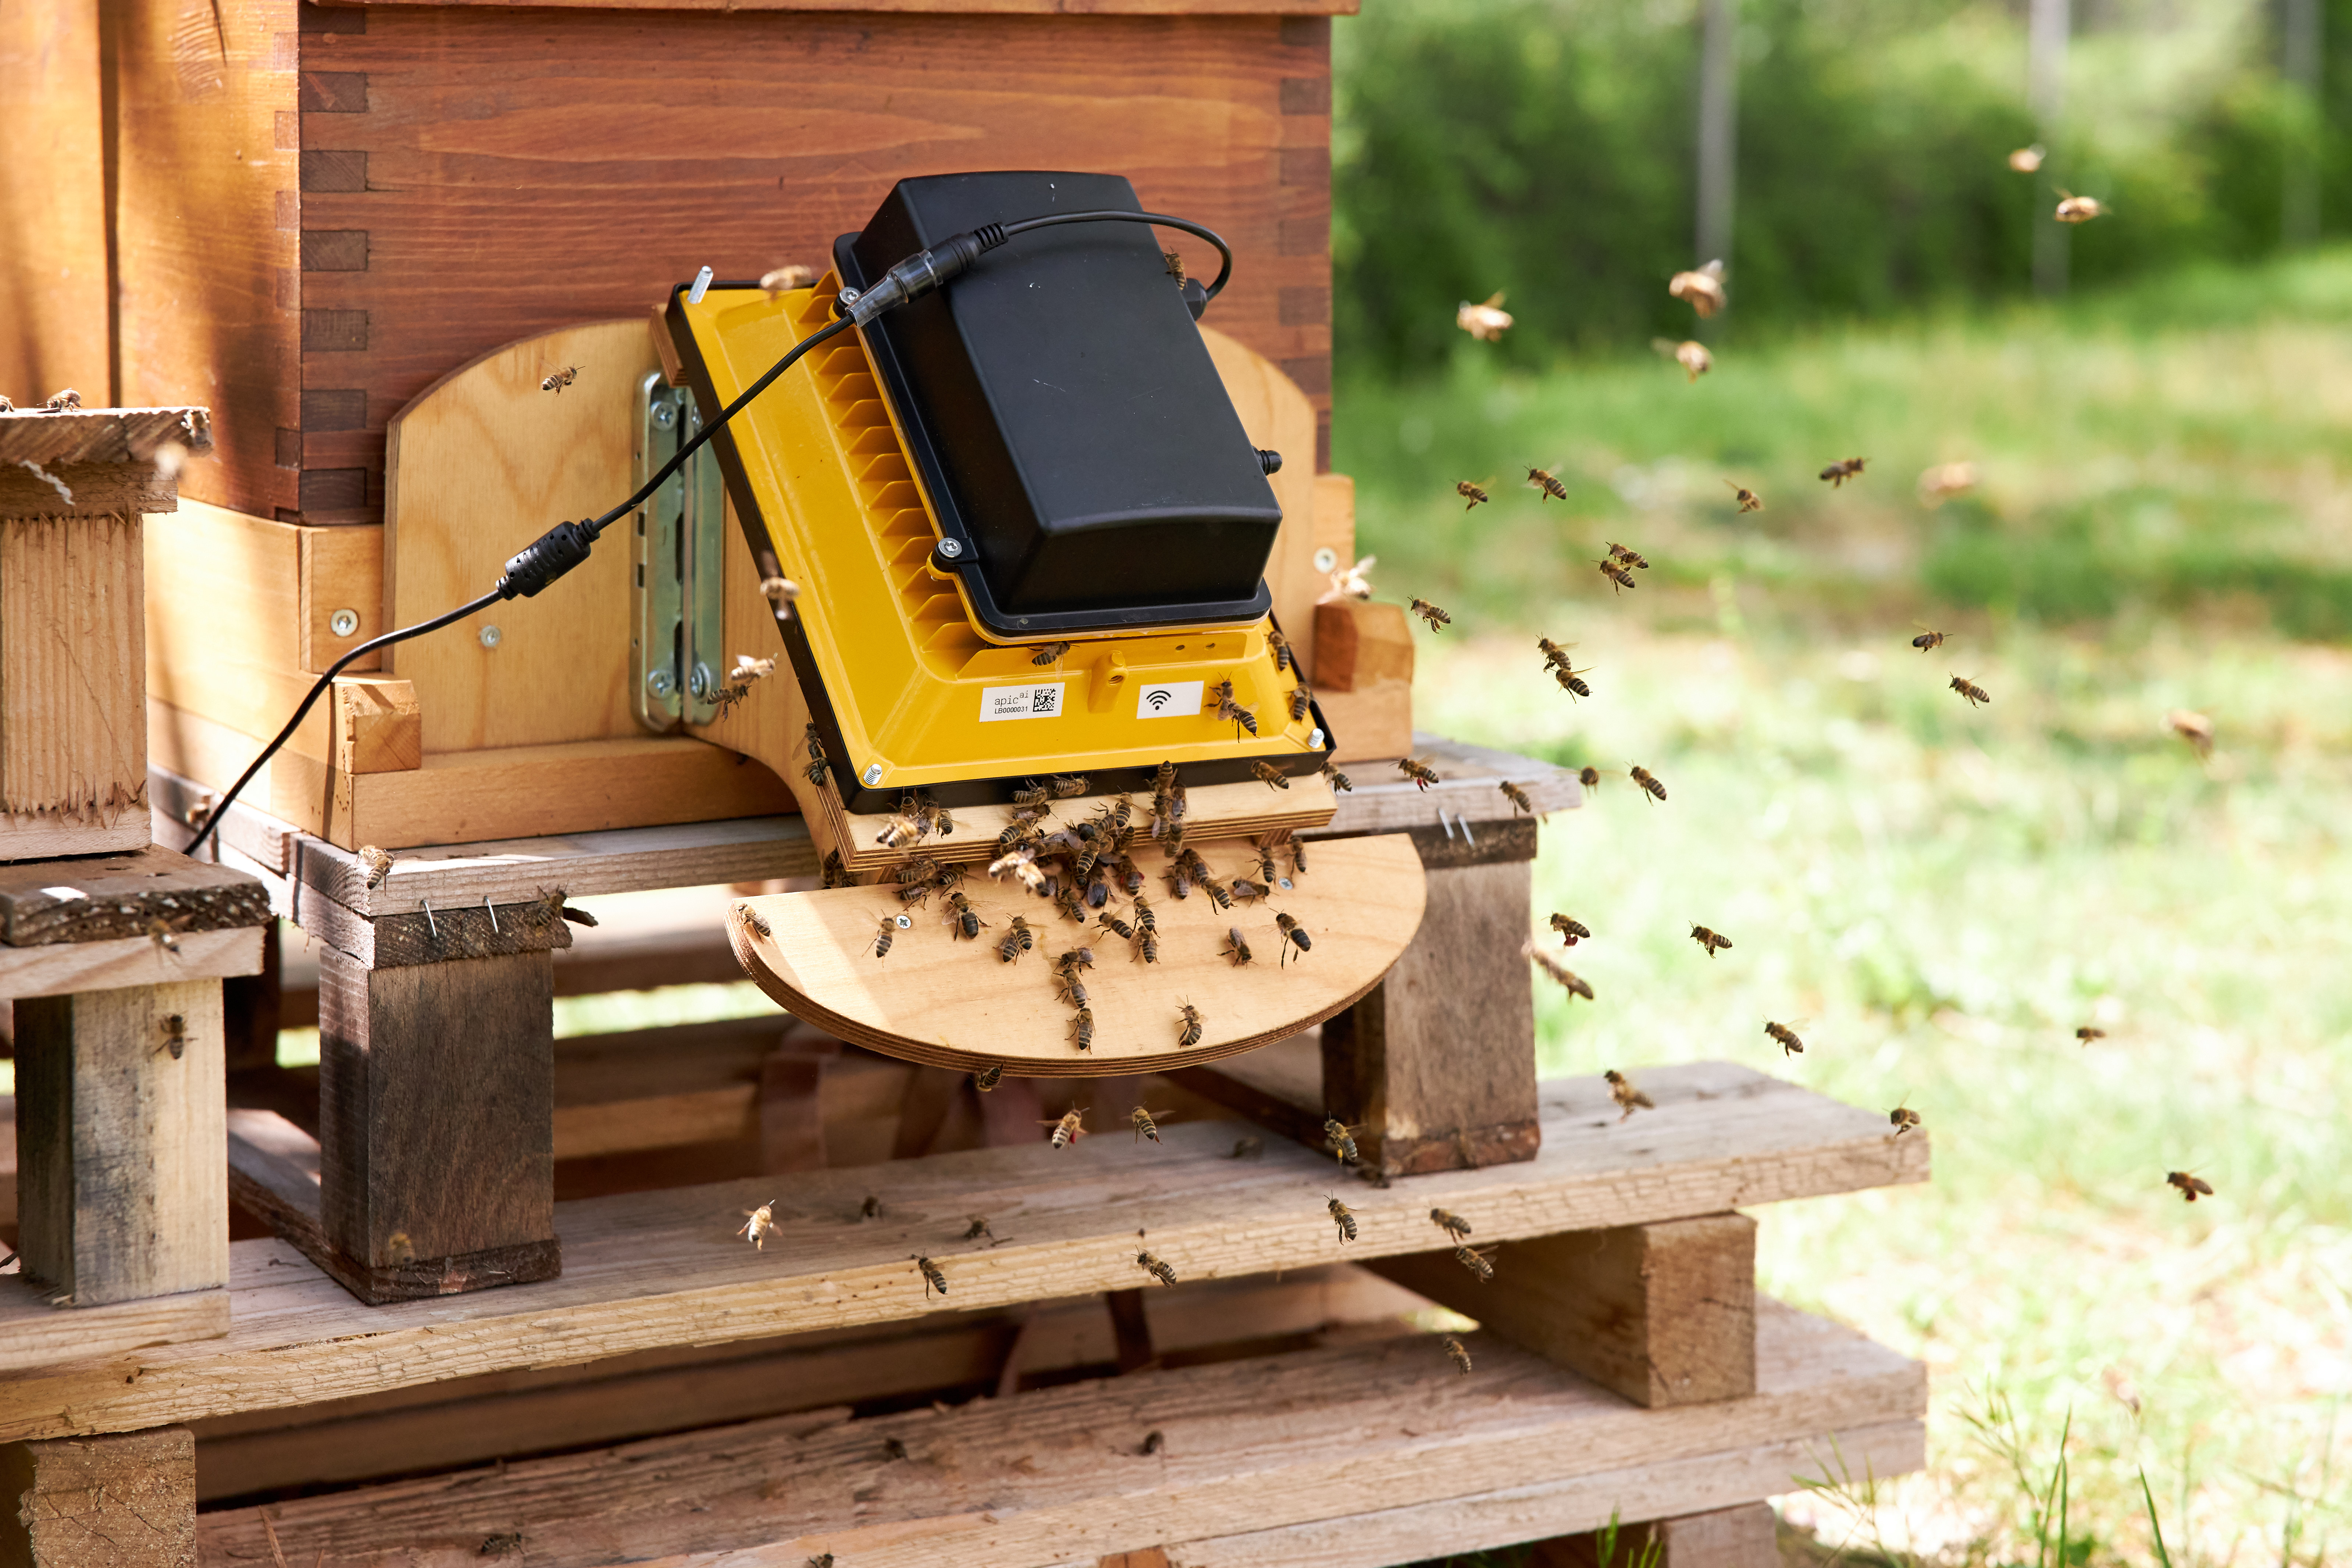 Bees as biosensors: the bees are filmed as they fly in and out of the beehive